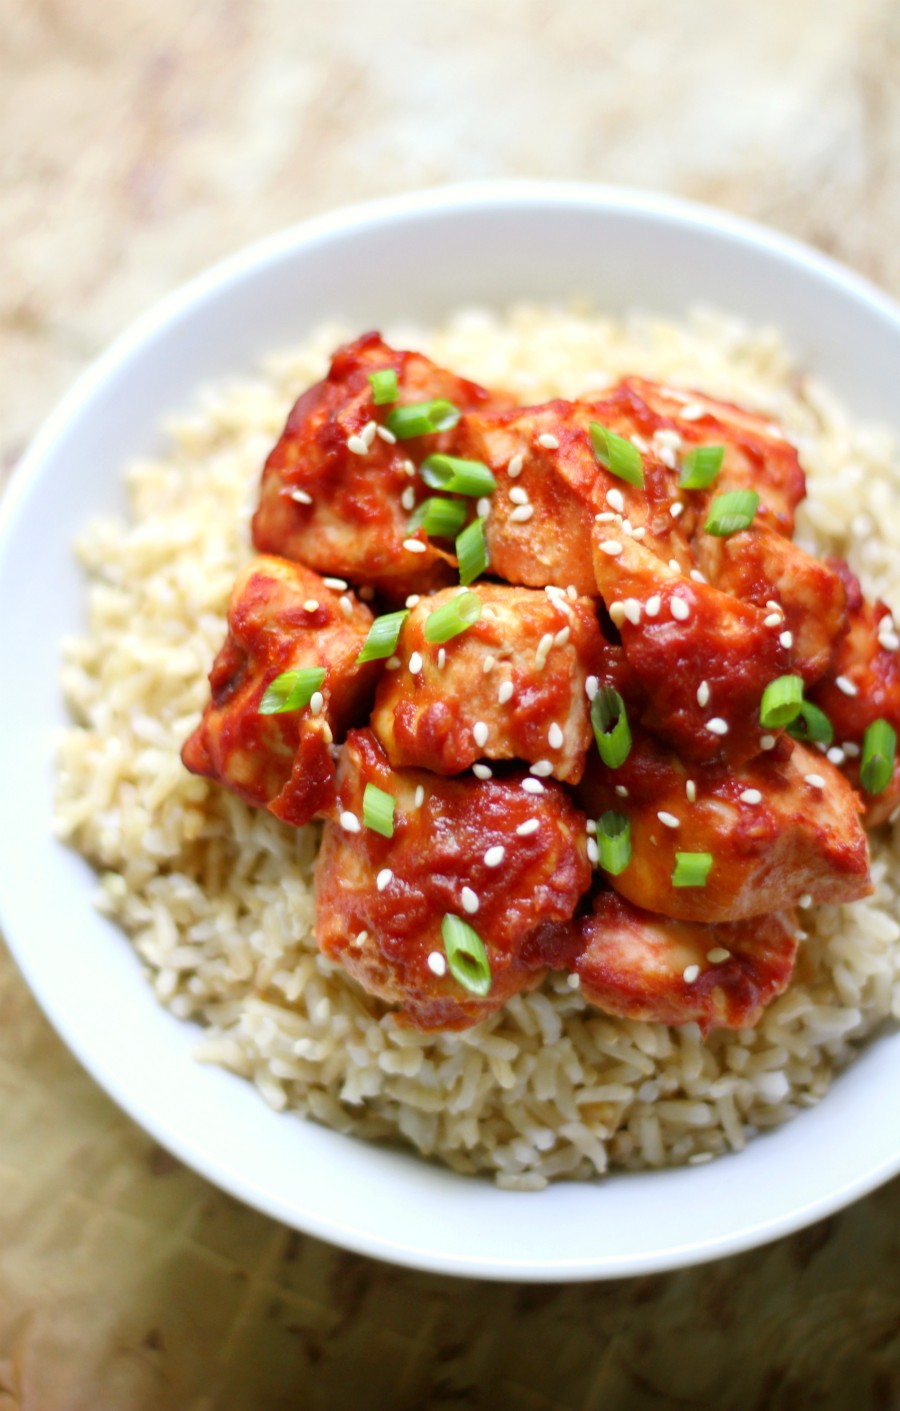 Gluten-Free Kung Pao Chicken (Paleo, Allergy-Free) | Strength and Sunshine @RebeccaGF666 Delicious and easy, this Gluten-Free Kung Pao Chicken is a healthier version of the classic Chinese takeout you can make at home! A recipe that's paleo, top 8 allergy-free, and with all the flavors and spice you love!